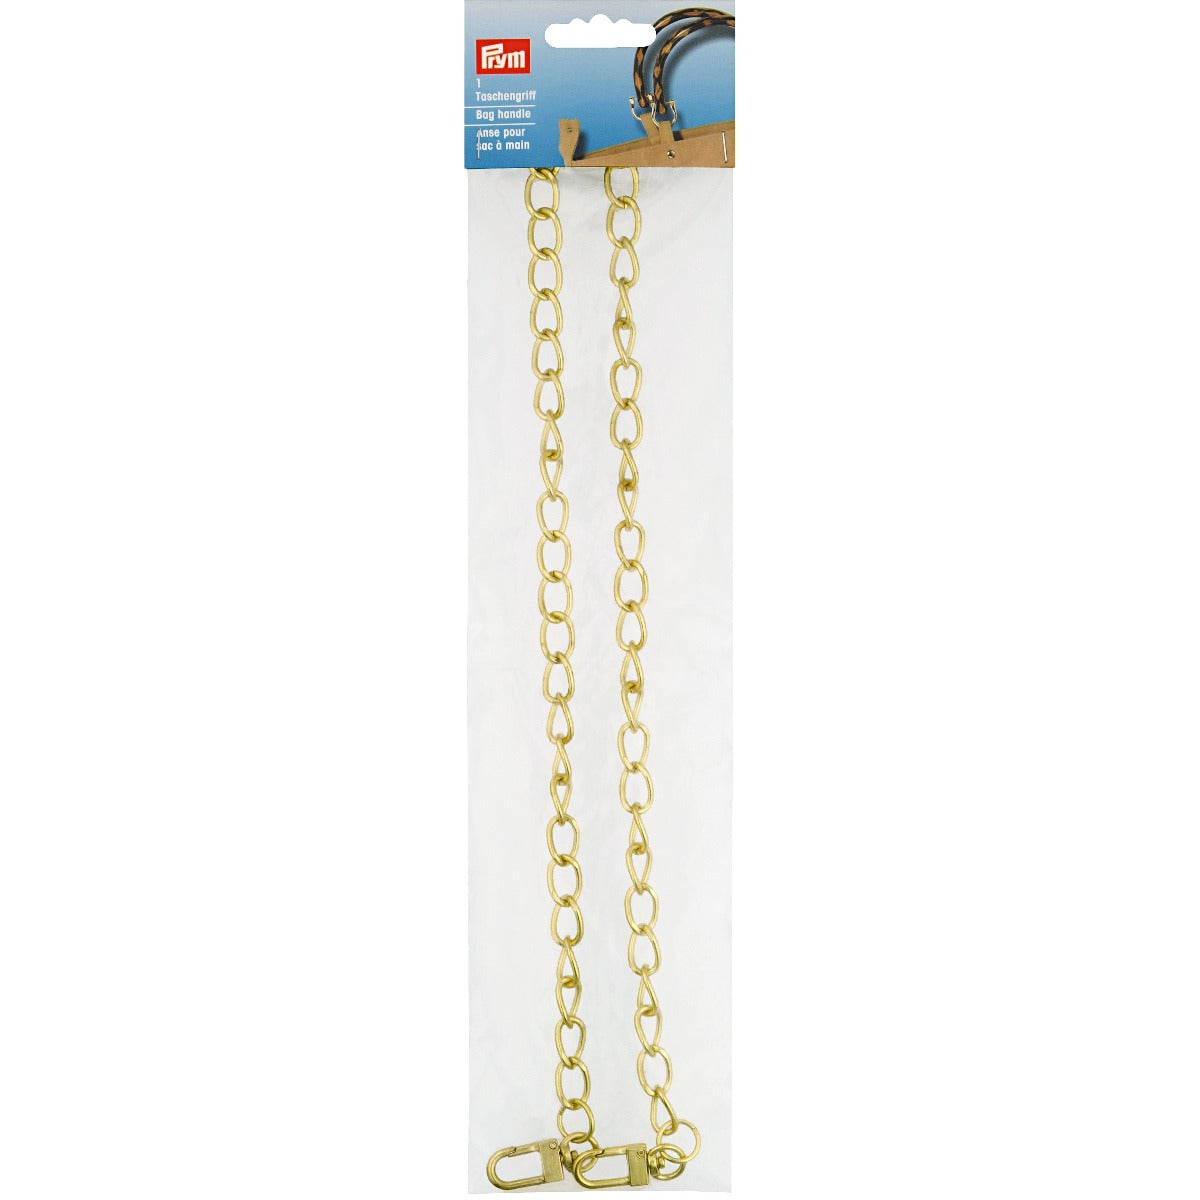 Prym Chain bag strap Gold colour 615177 from Jaycotts Sewing Supplies